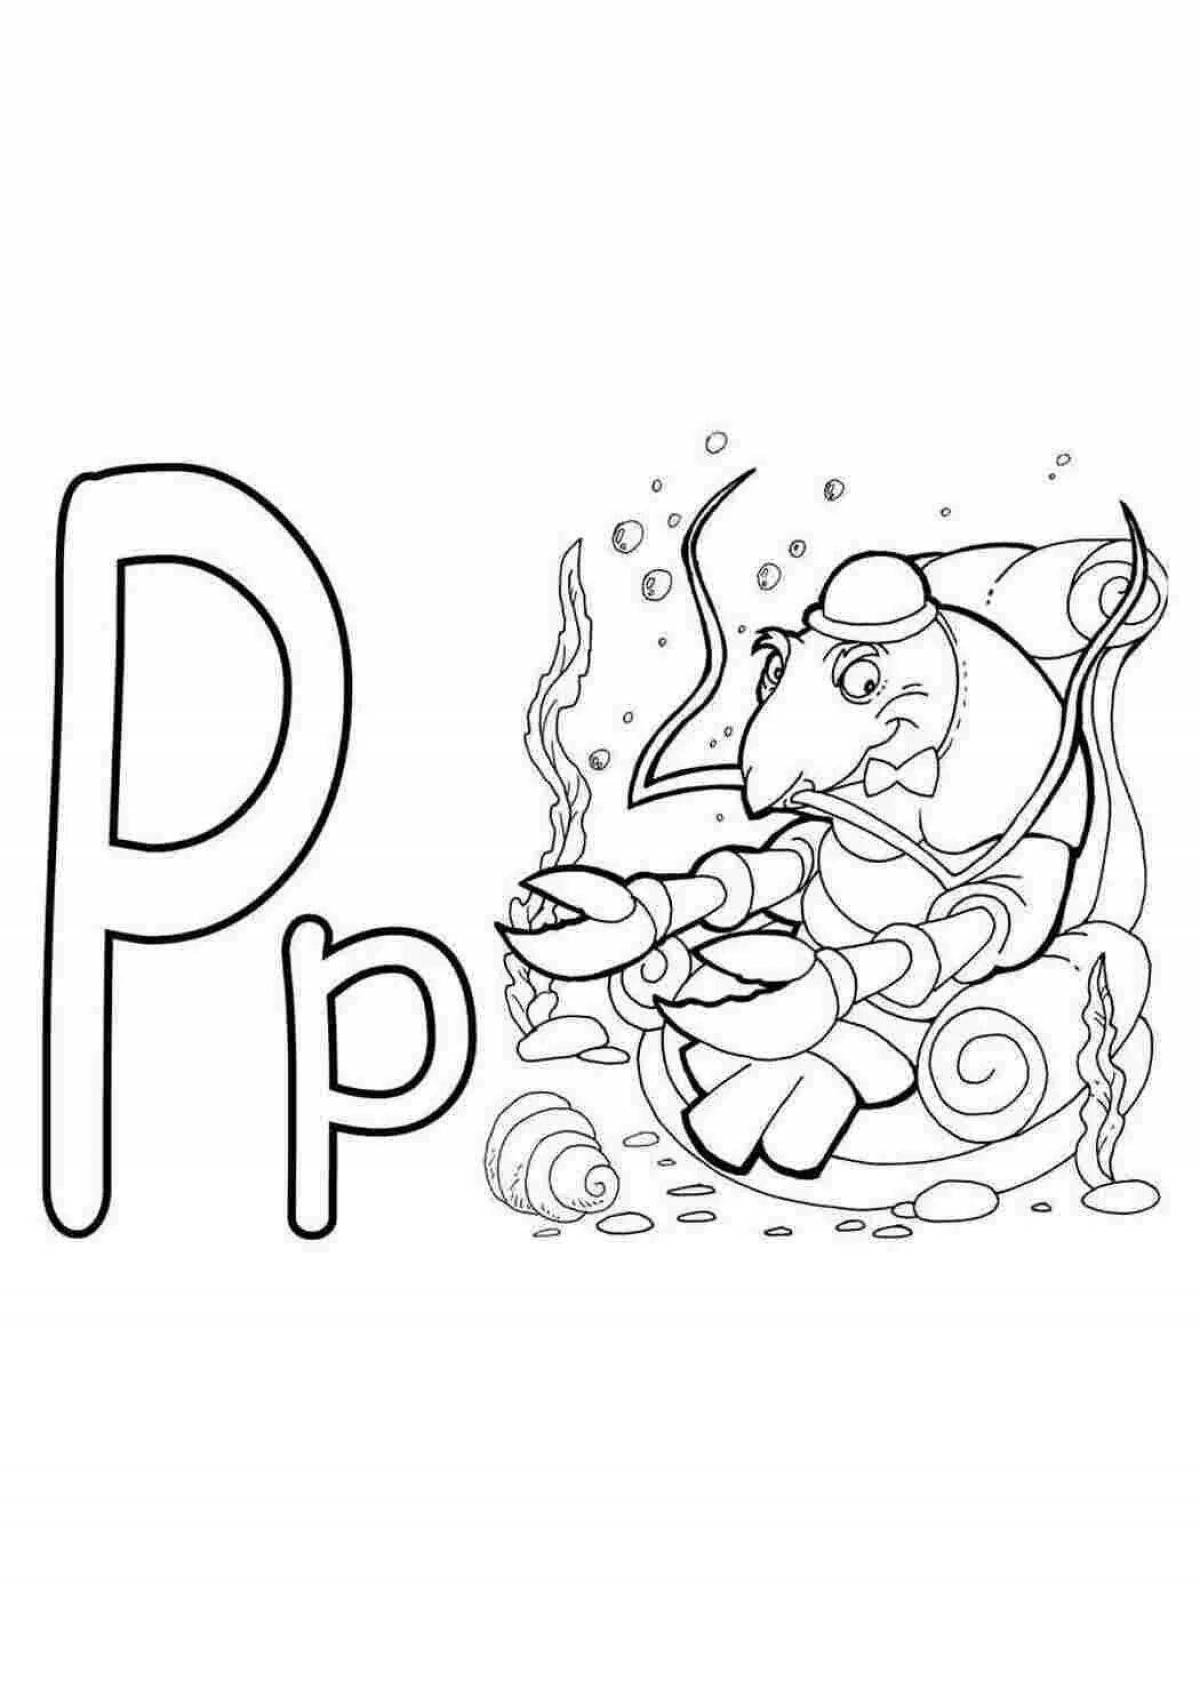 Colourful letter p coloring book for kids